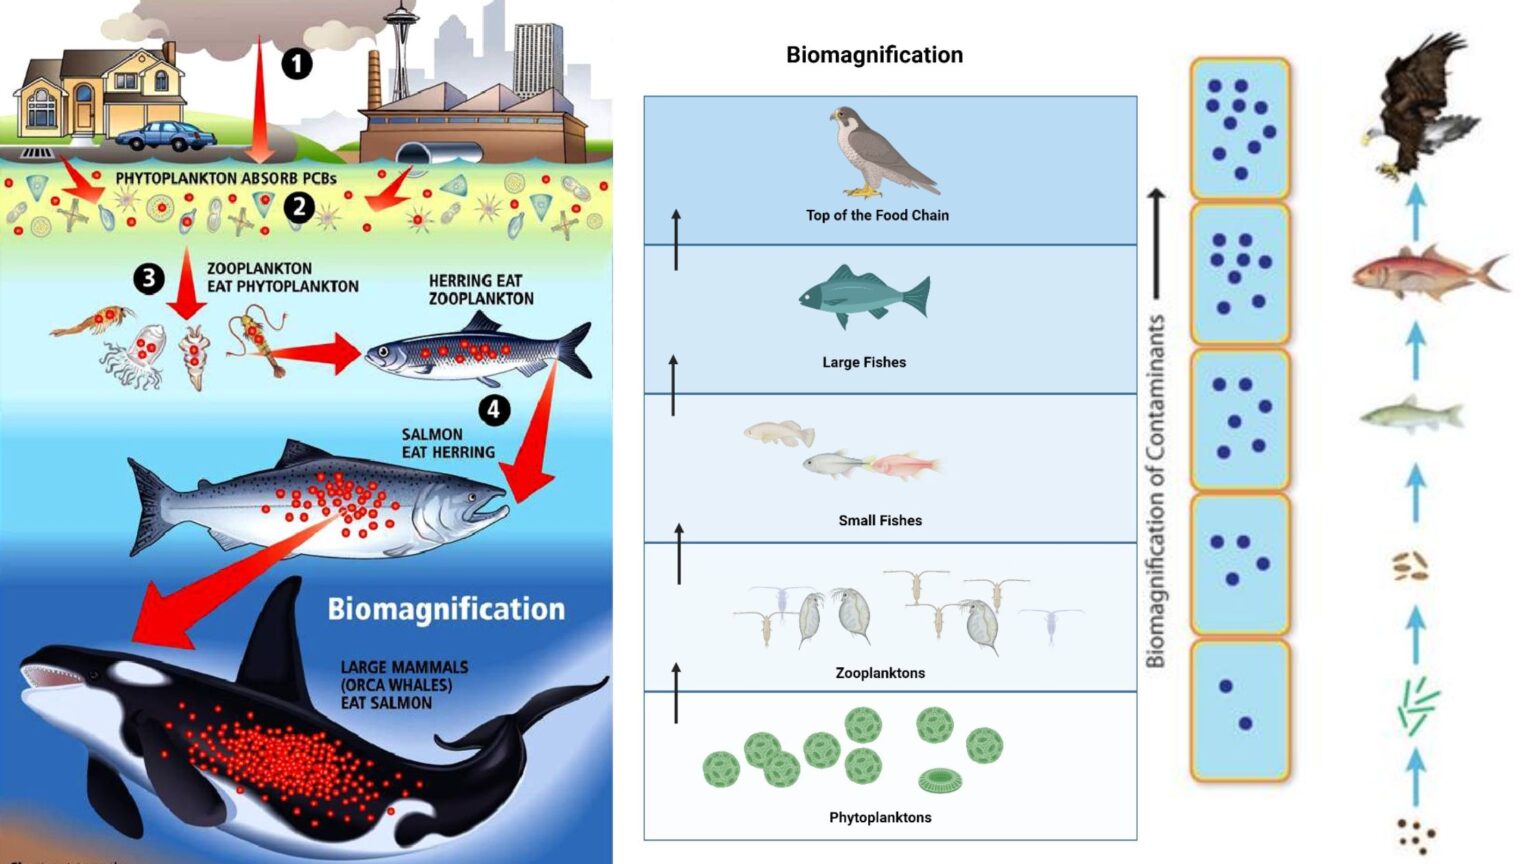 <ul><li><p>Increasing concentration of a harmful substance in organisms at higher trophic levels in a food chain or food web</p></li></ul>